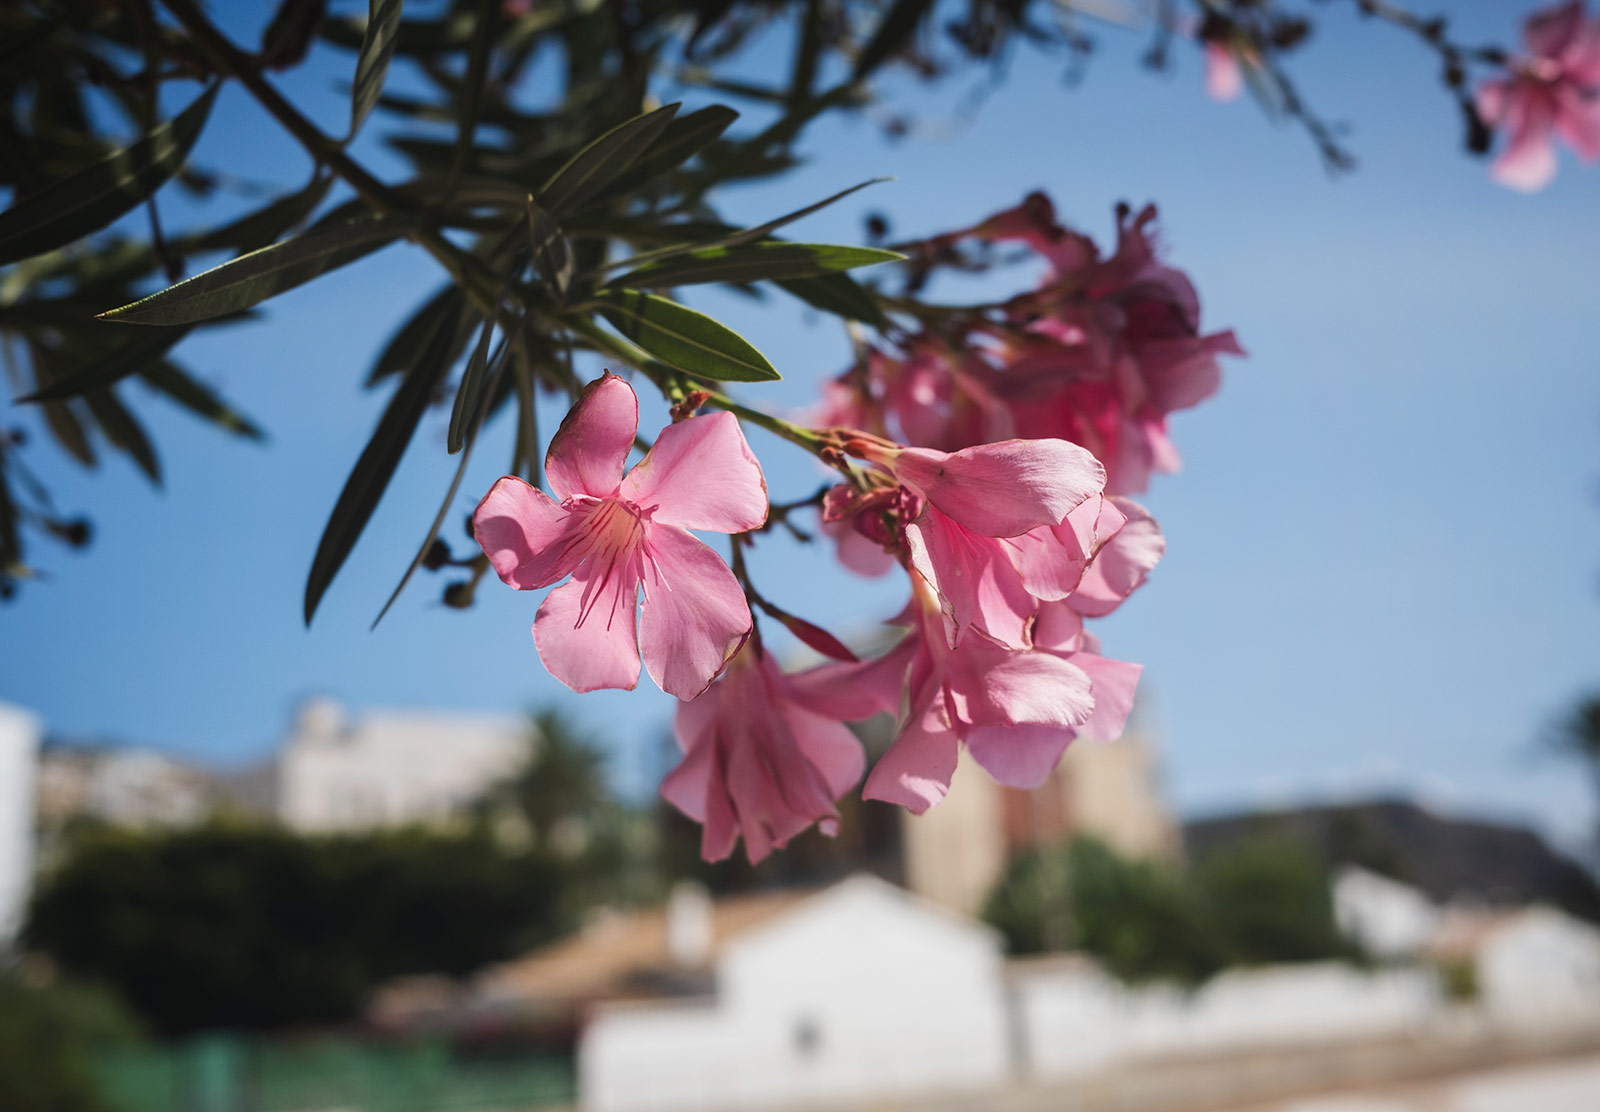 Pink flowers growing on a tree